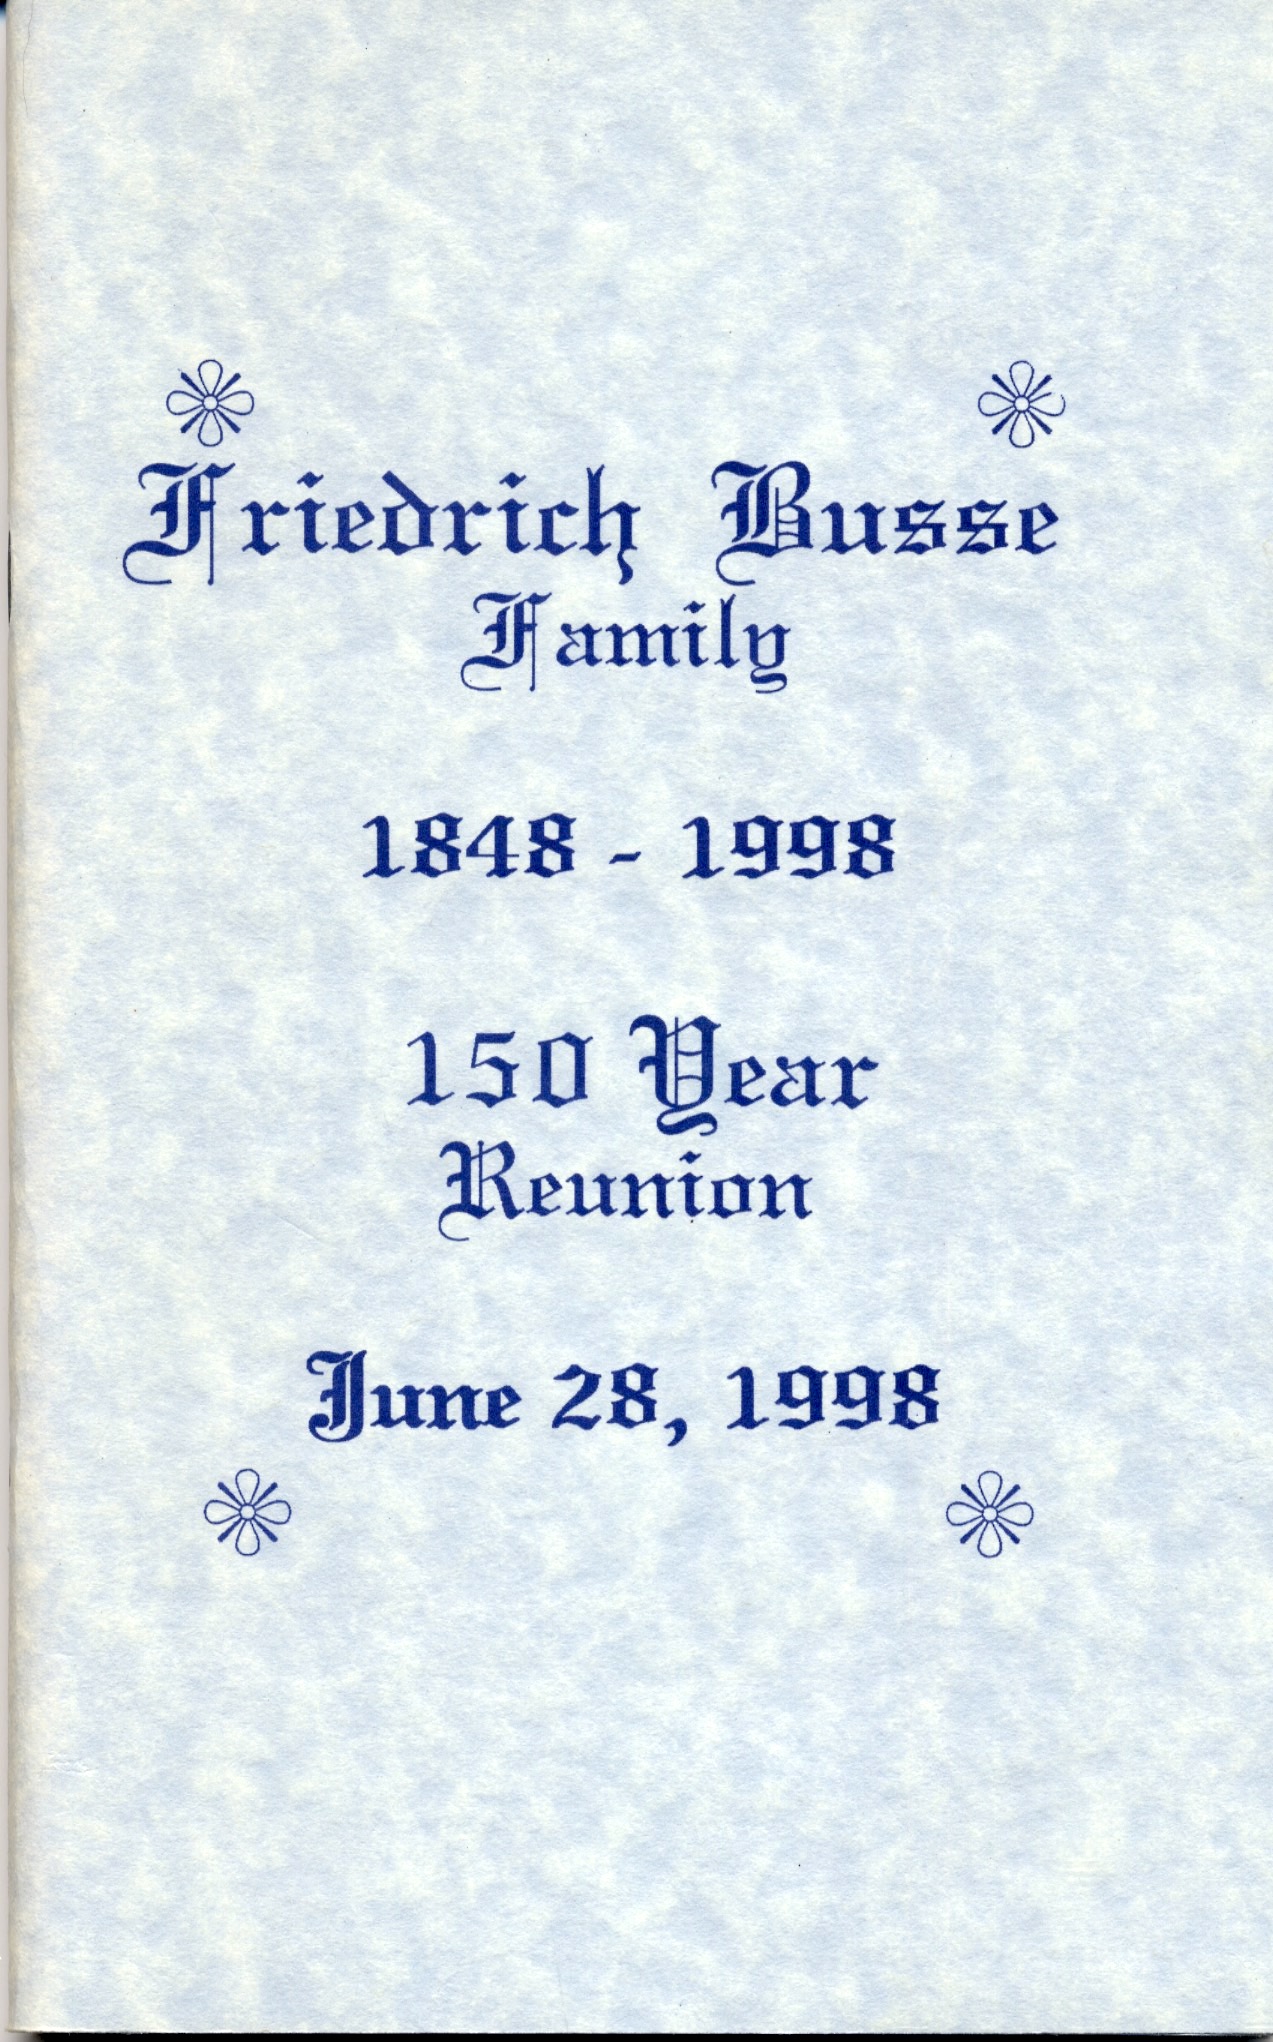 Cover of booklet with Busse descendent addresses